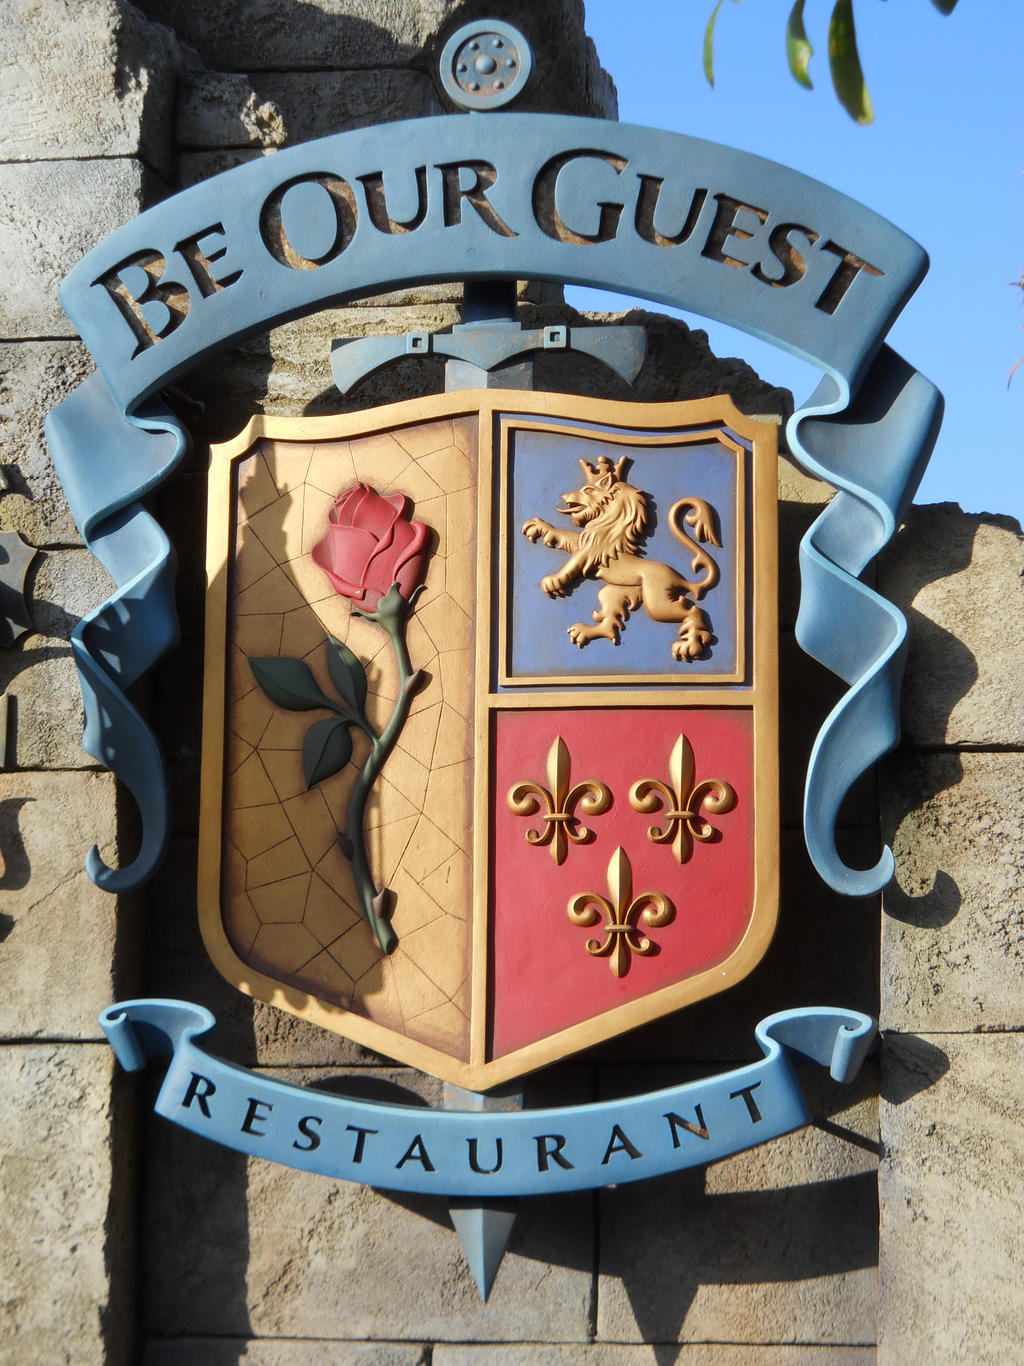 Be Our Guest Sign